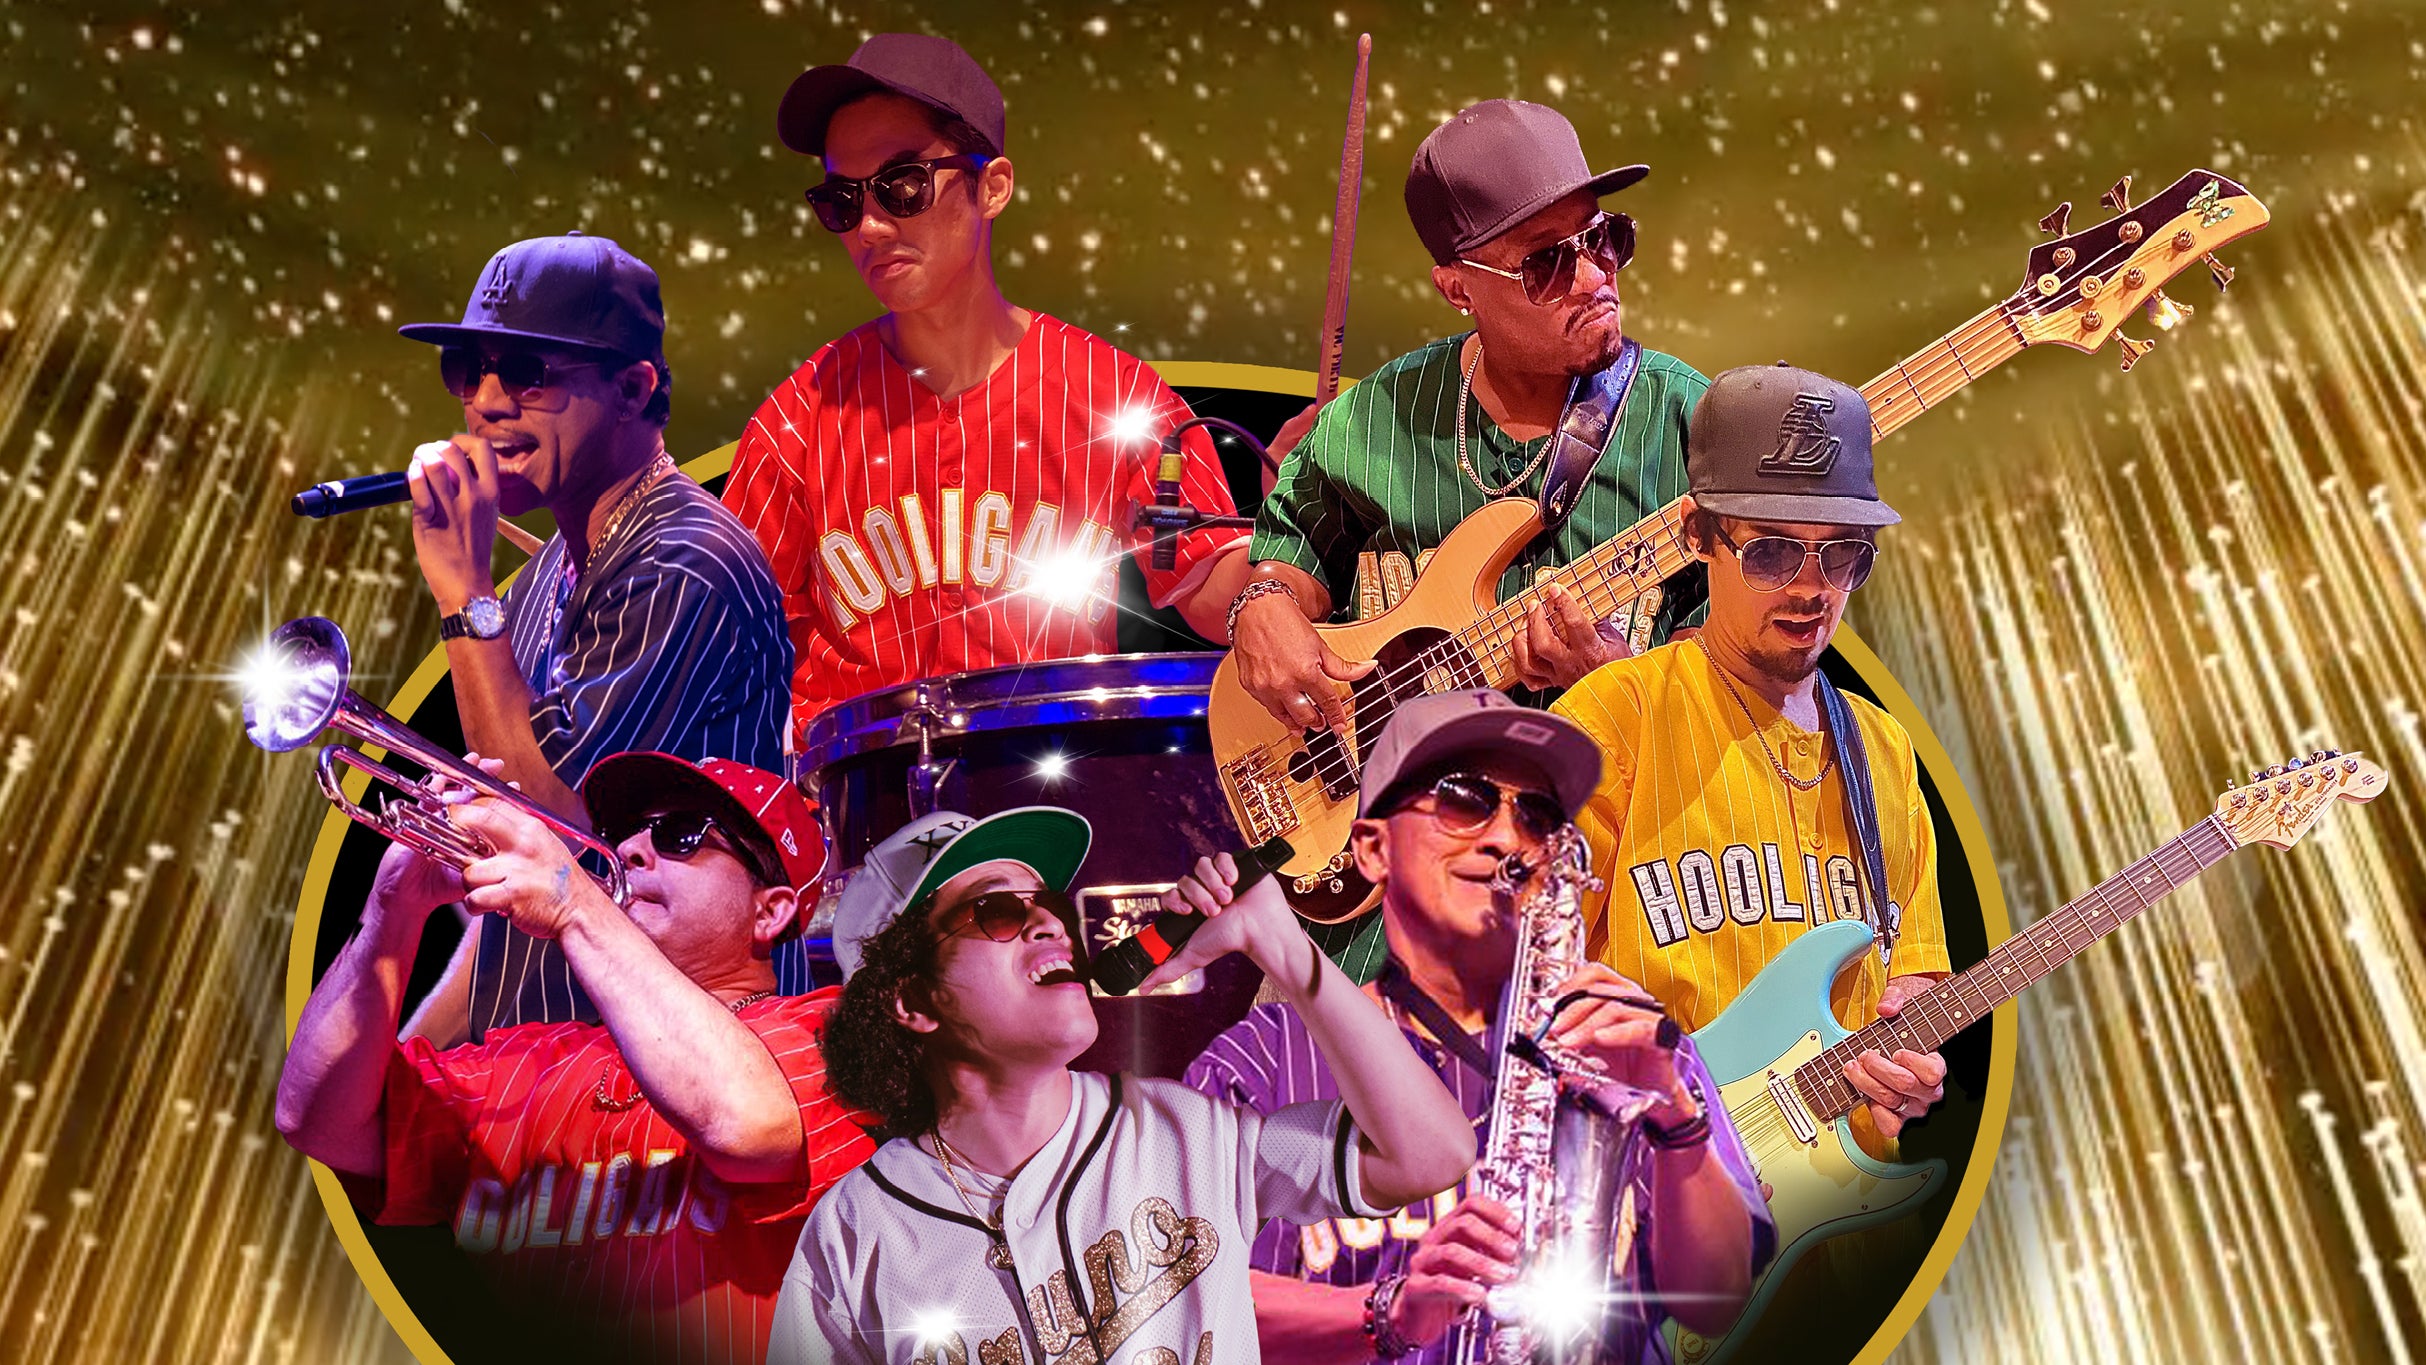 BRUNO and the HOOLIGANS in North Las Vegas promo photo for Ticketmaster Mobile App presale offer code